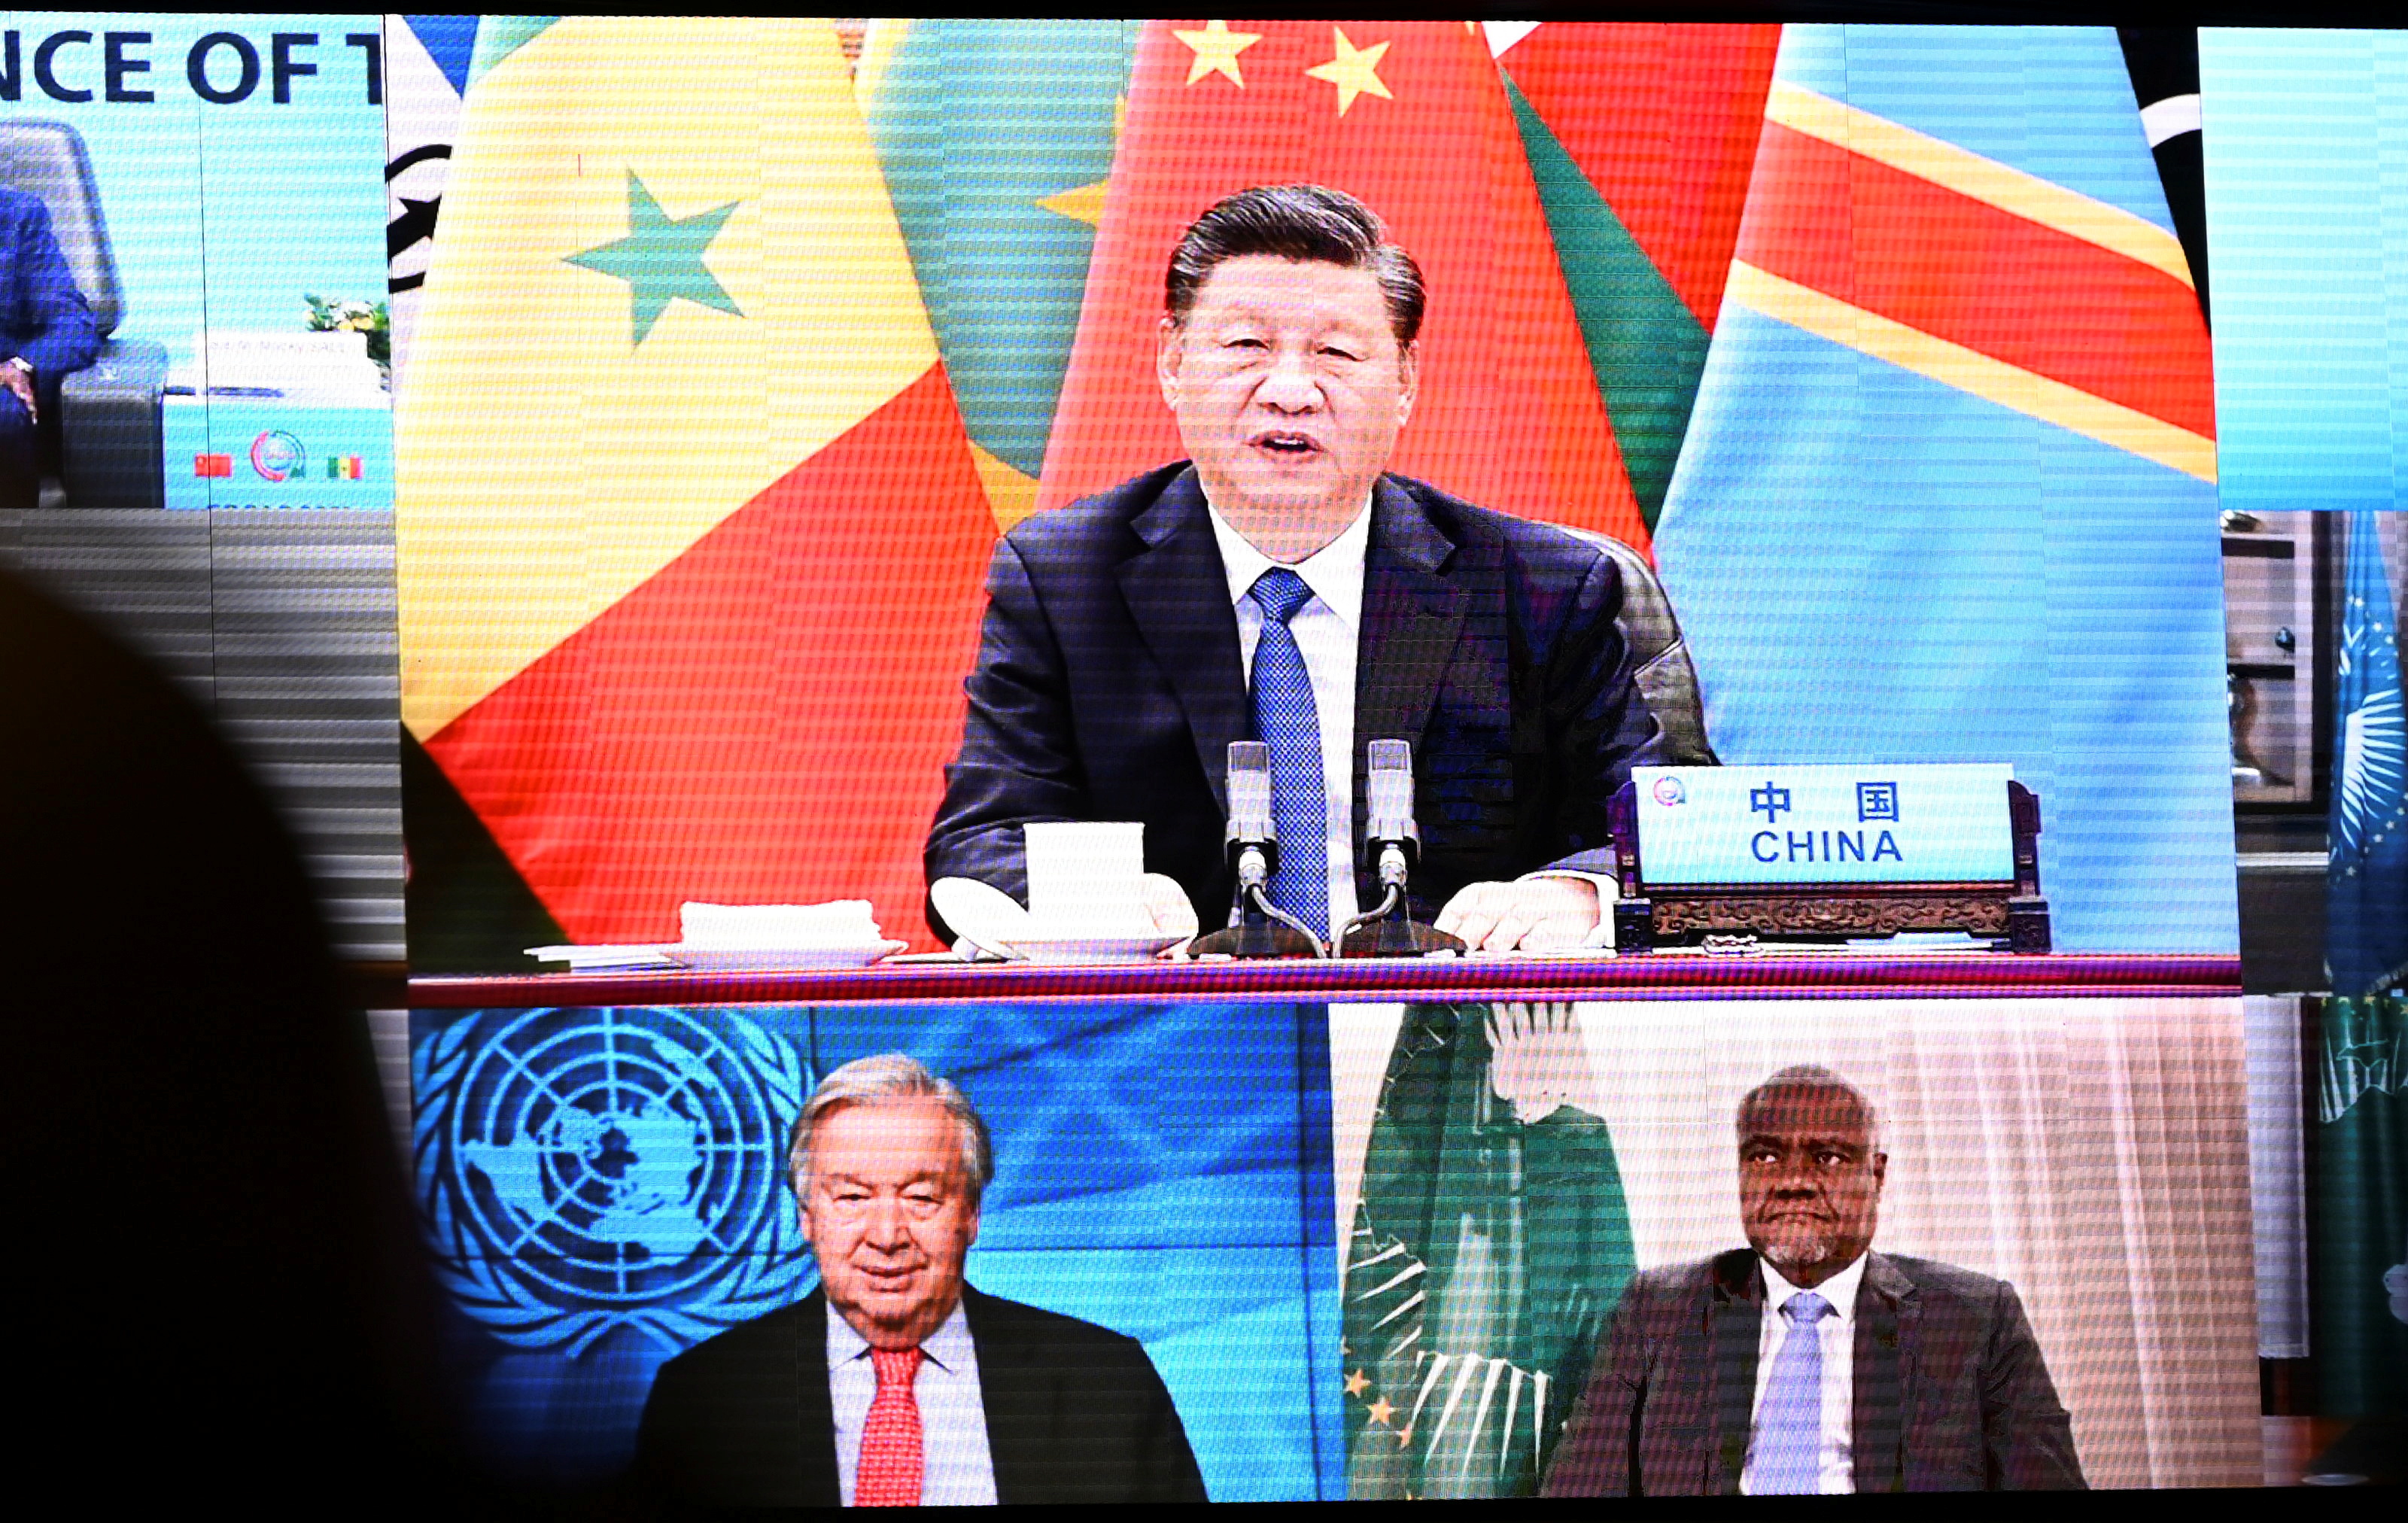 China's President Xi Jinping gives a speech via video link at the opening of the Forum on China-Africa Cooperation, (FOCAC) in Dakar, Senegal November 29, 2021. REUTERS/Cooper Inveen